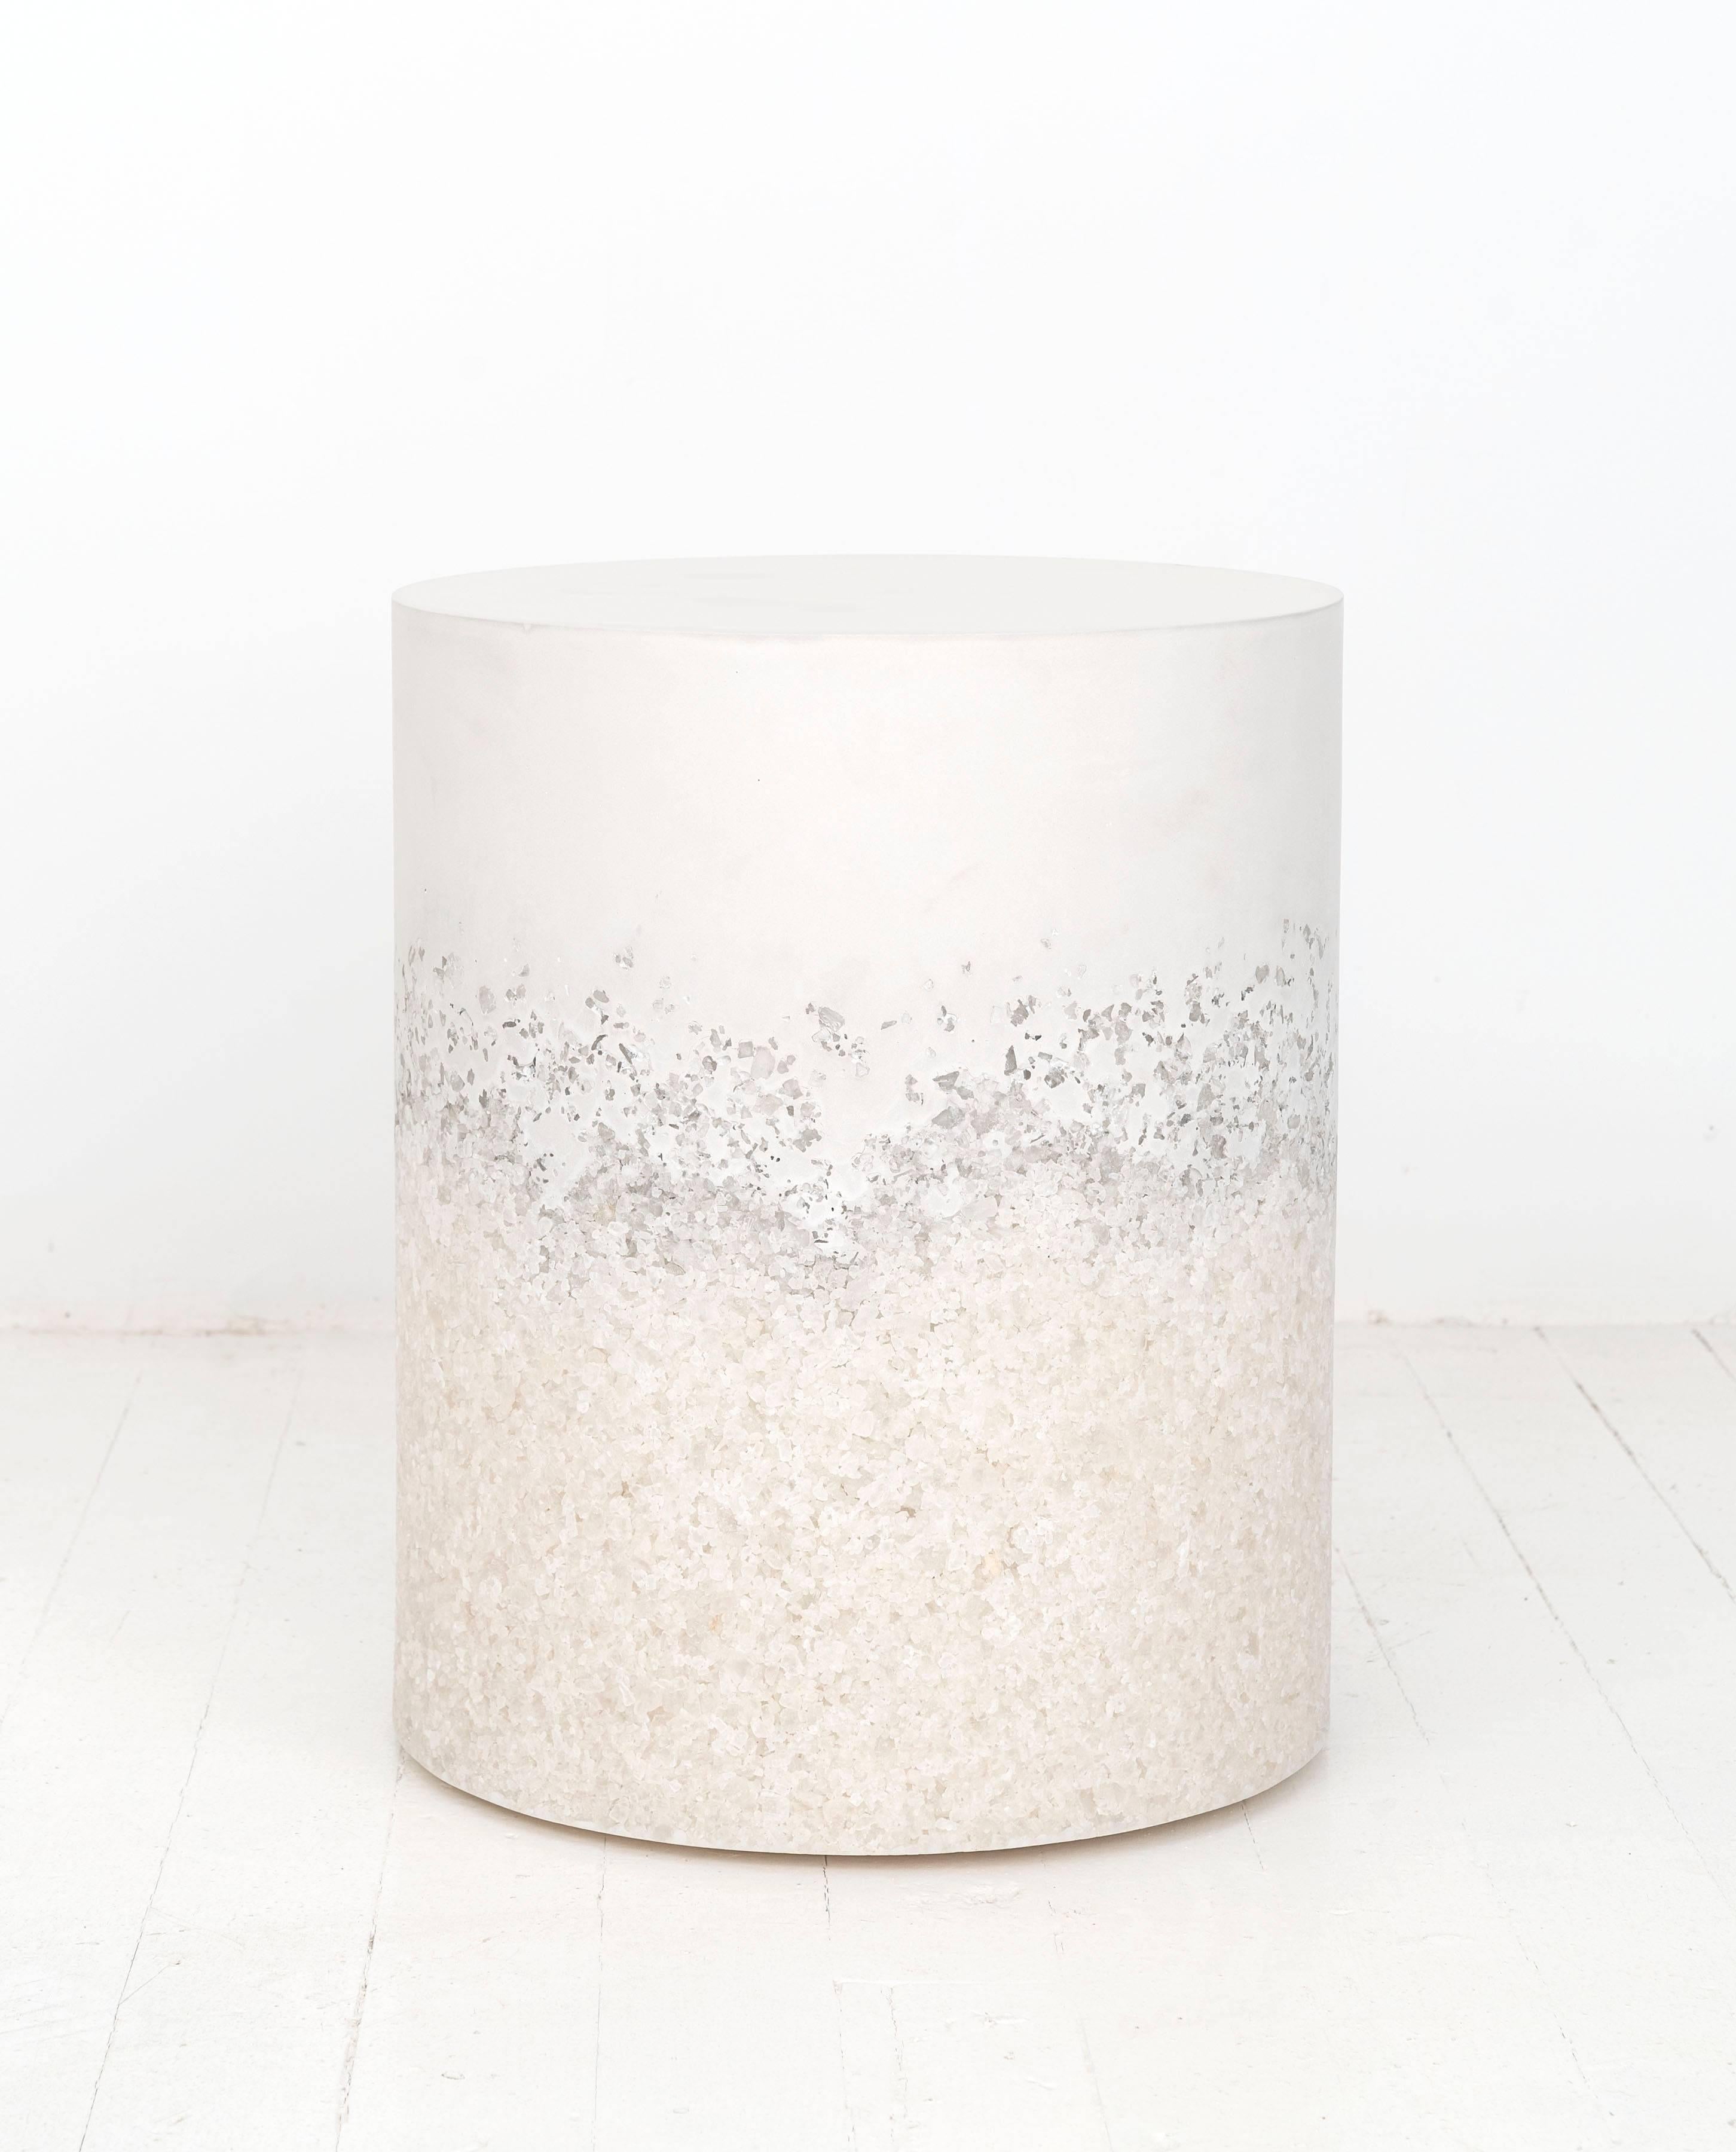 This made-to-order drum consists of a hand-dyed white cement top and a packed white rock salt bottom. The cement is poured by hand over the salt, creating an organic blend of the materials. The piece has a hollow cavity and weighs approximately